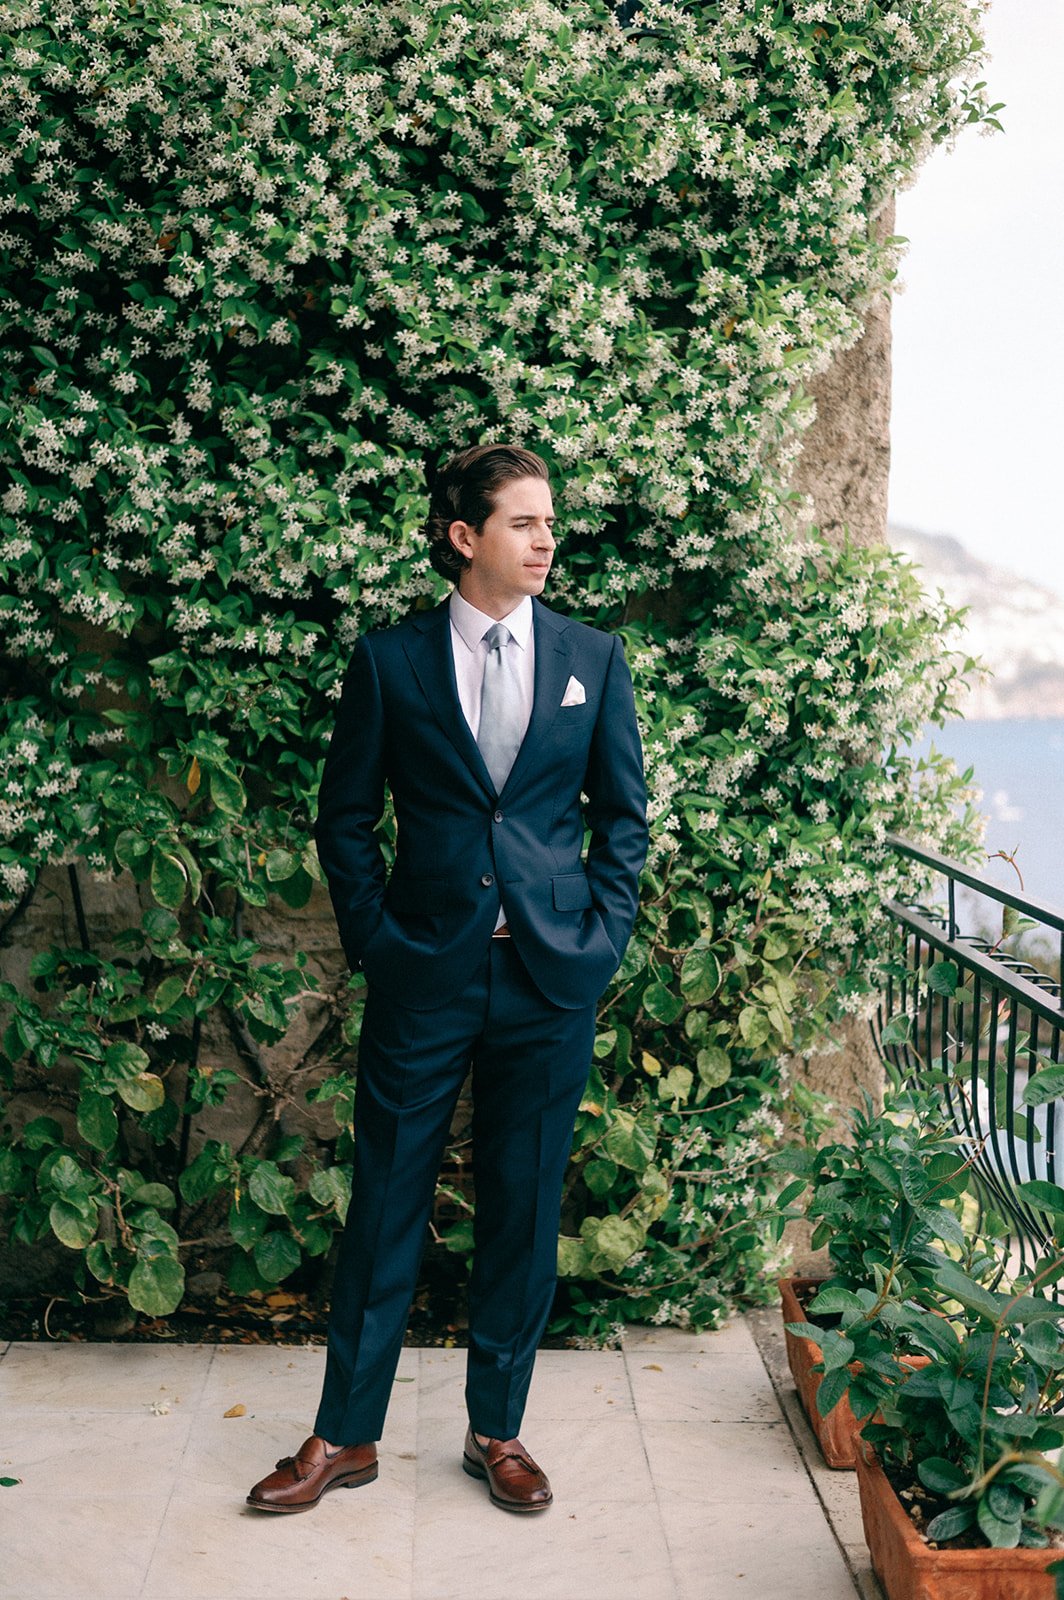 positano italy wedding getting ready pictures